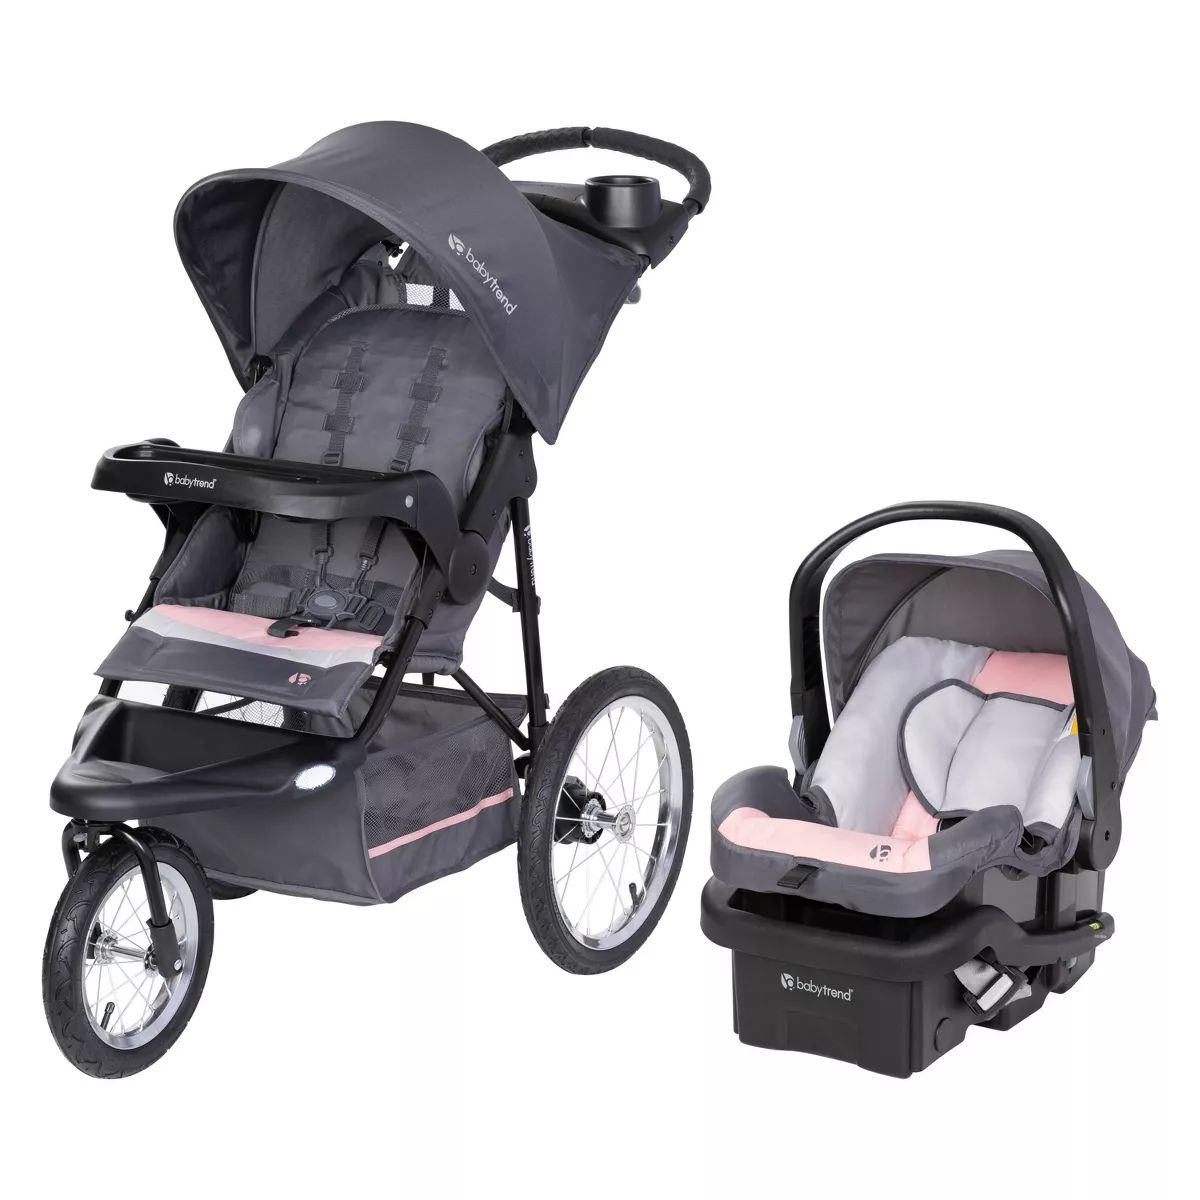 Baby Trend Expedition Jogger Travel System with EZ-Lift Infant Car Seat - Pink | Target